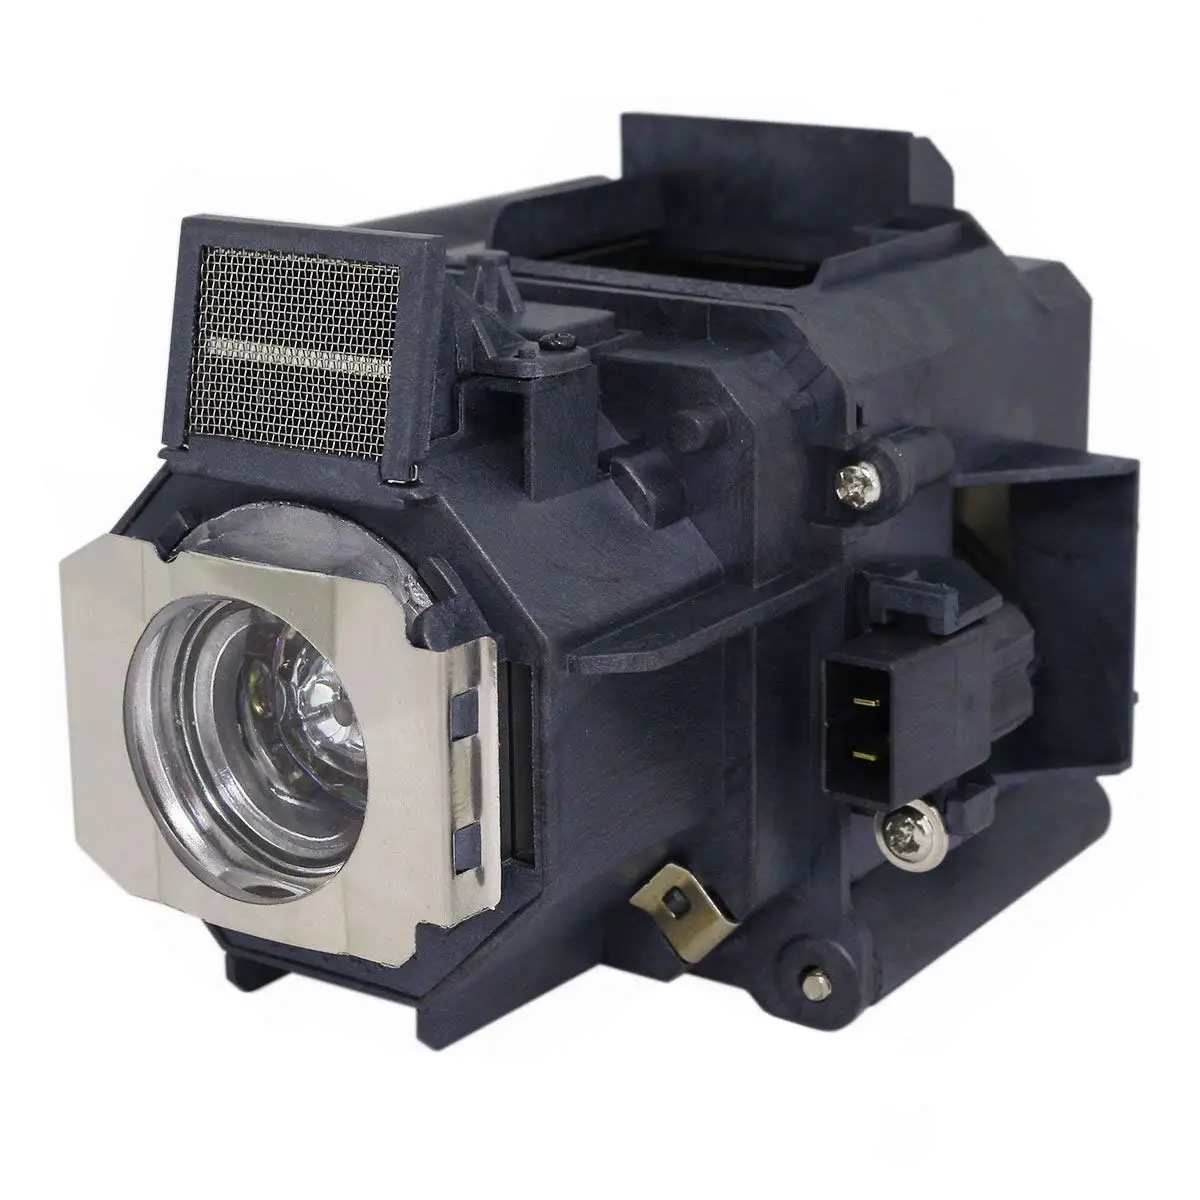 

For ELPLP63 V13H010L63 projector lamp for EPSON EB-C450WH C450WU C520XH G5660W G5800 G5900 G5900 G5950 N G5650W G5750WU G5950